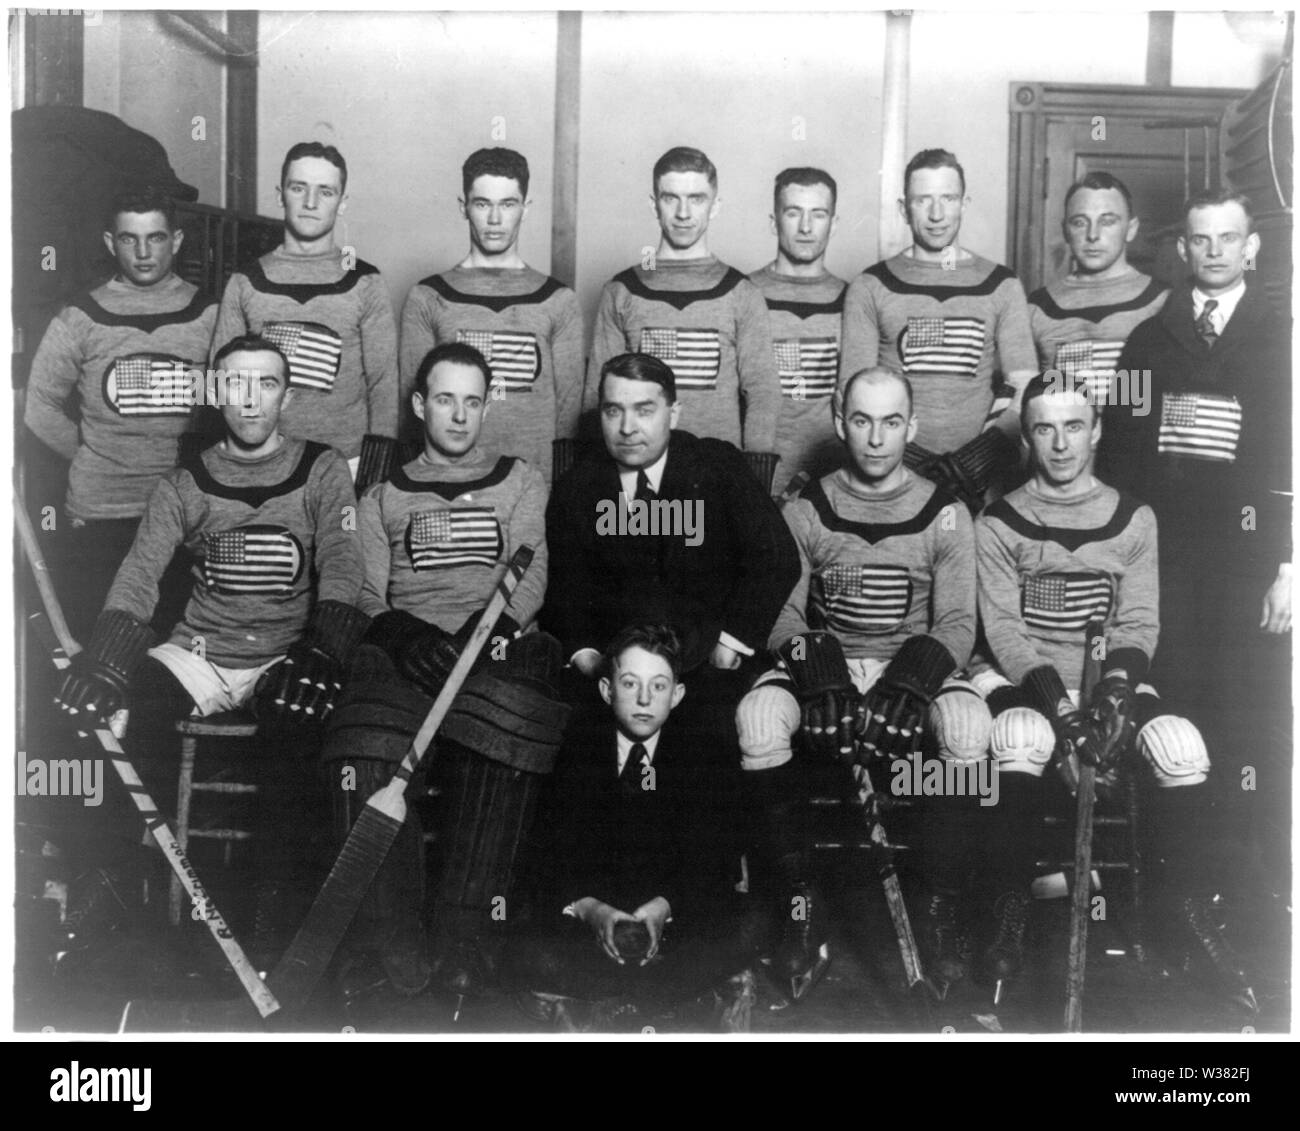 1920 USA Men's Olympic ice hockey team.  Left to right, standing: Cyril Weidenborner, Anthony Conroy, George Geran, Joe McCormick, Frank Goheen, Ed Fitzgerald, Leon Tuck, unknown.  Left to right, sitting: Frank Synott, Raymond Bonney, unknown, Herb Drury, Larry McCormick.  Unknown child sitting on floor. Stock Photo